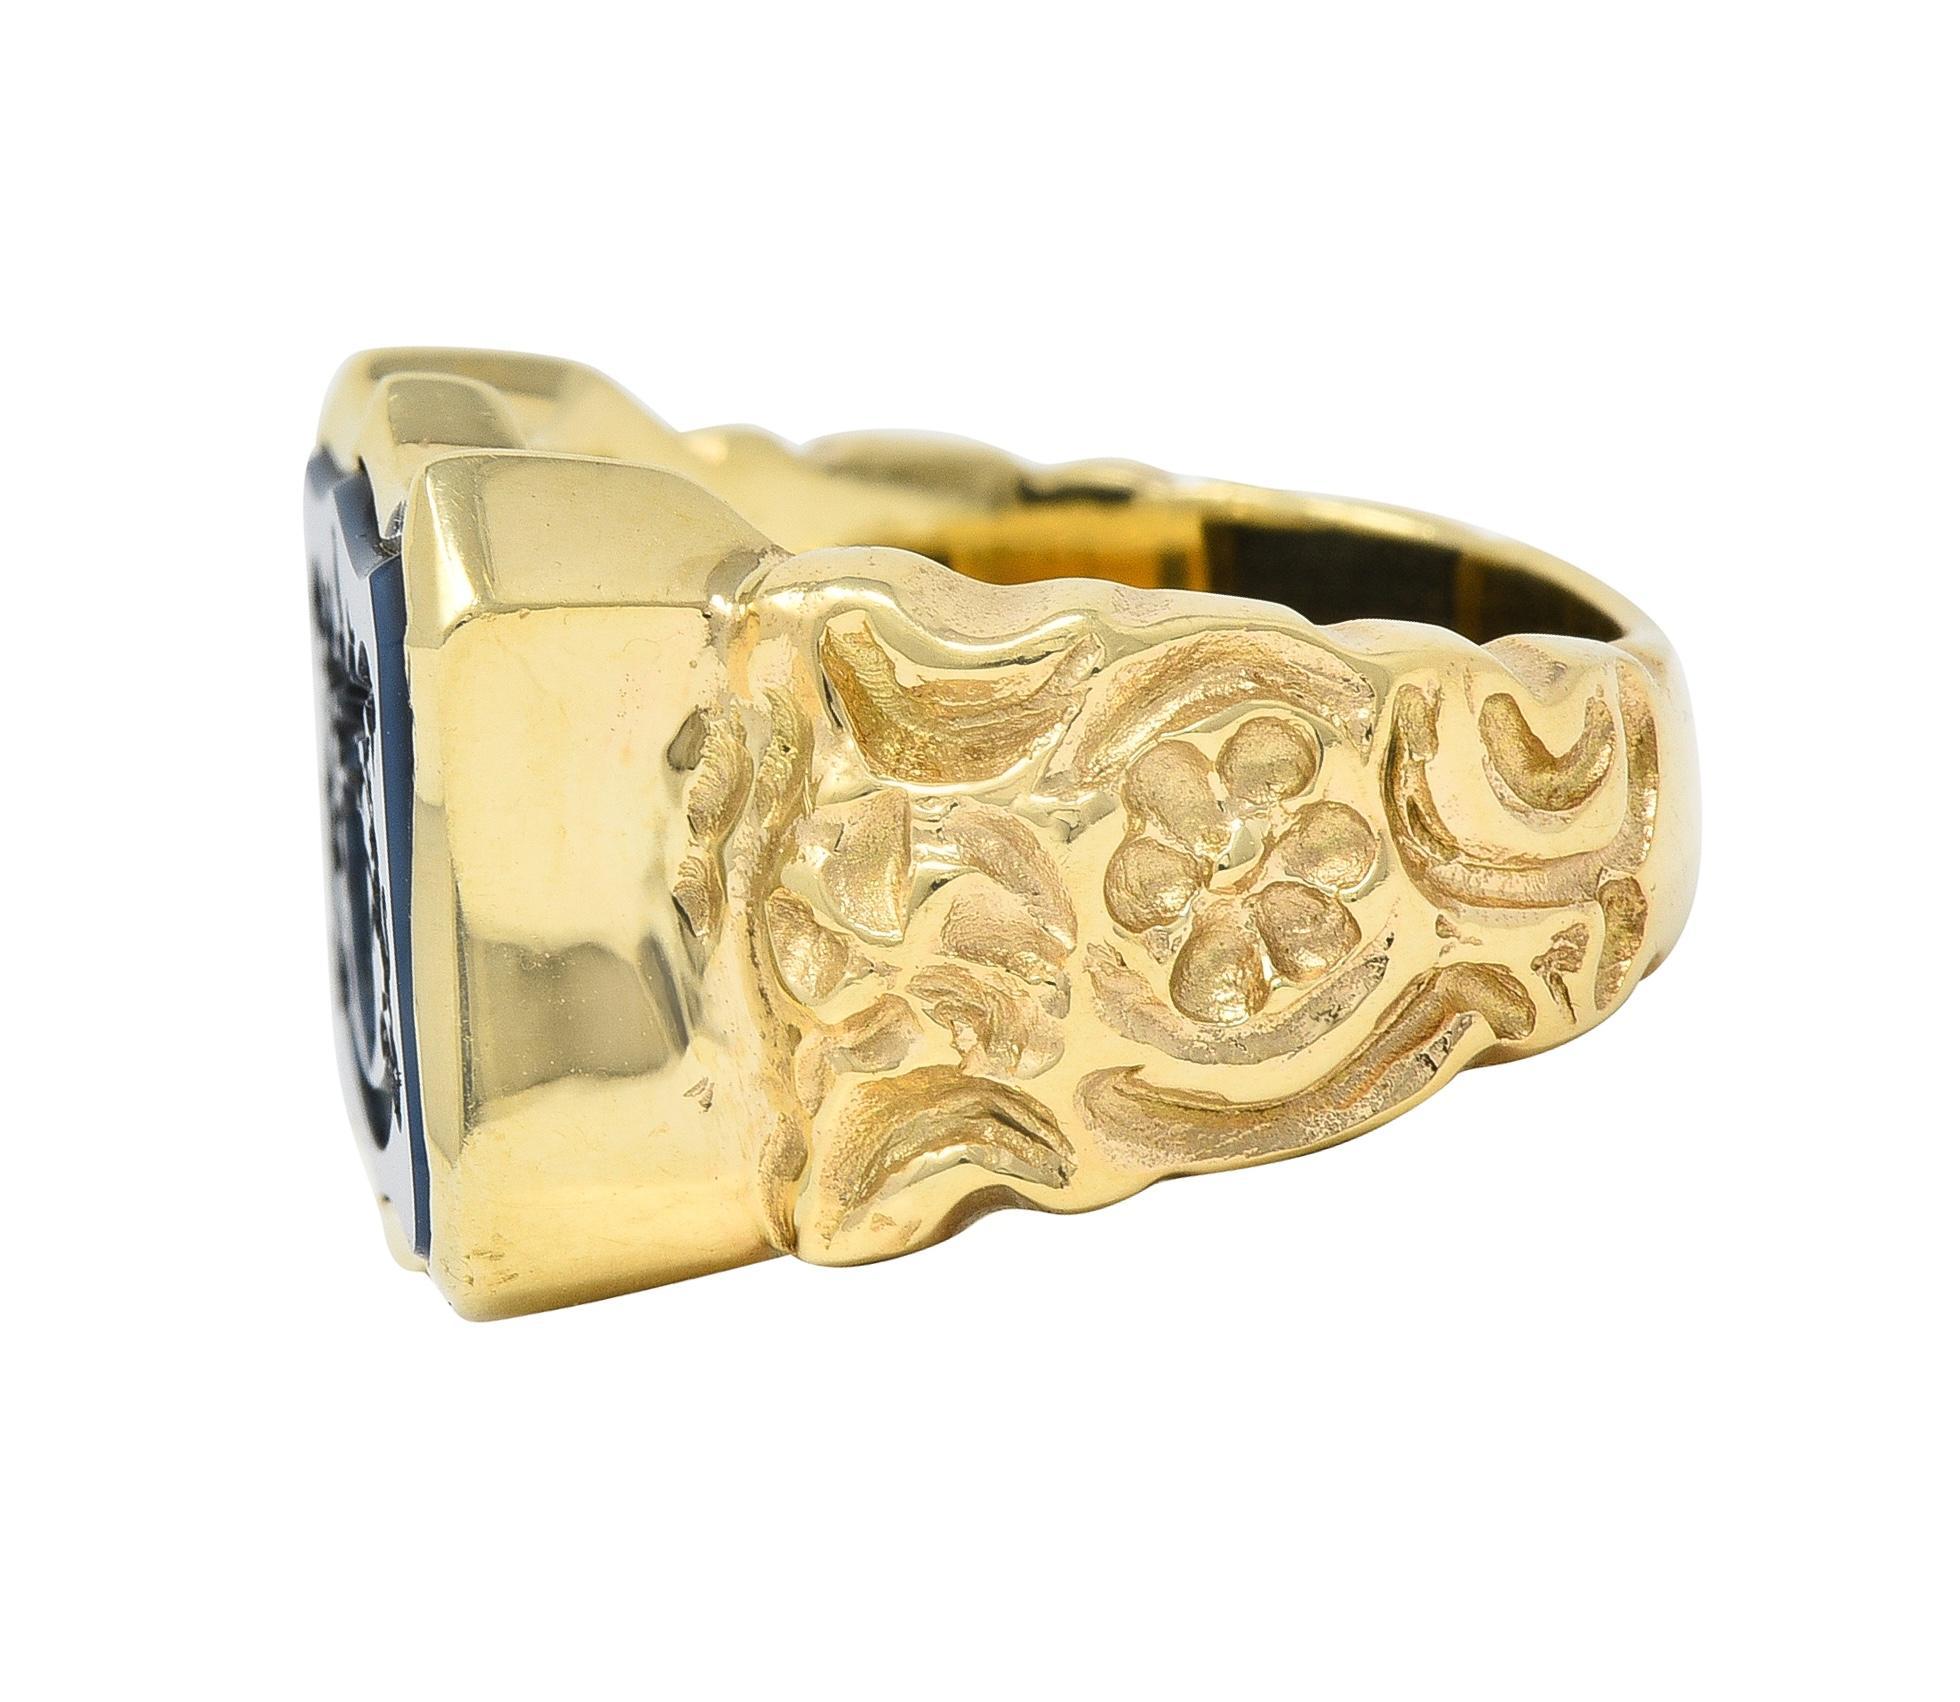 Vintage Carved Agate 14 Karat Yellow Gold Crest Unisex Signet Ring In Excellent Condition For Sale In Philadelphia, PA